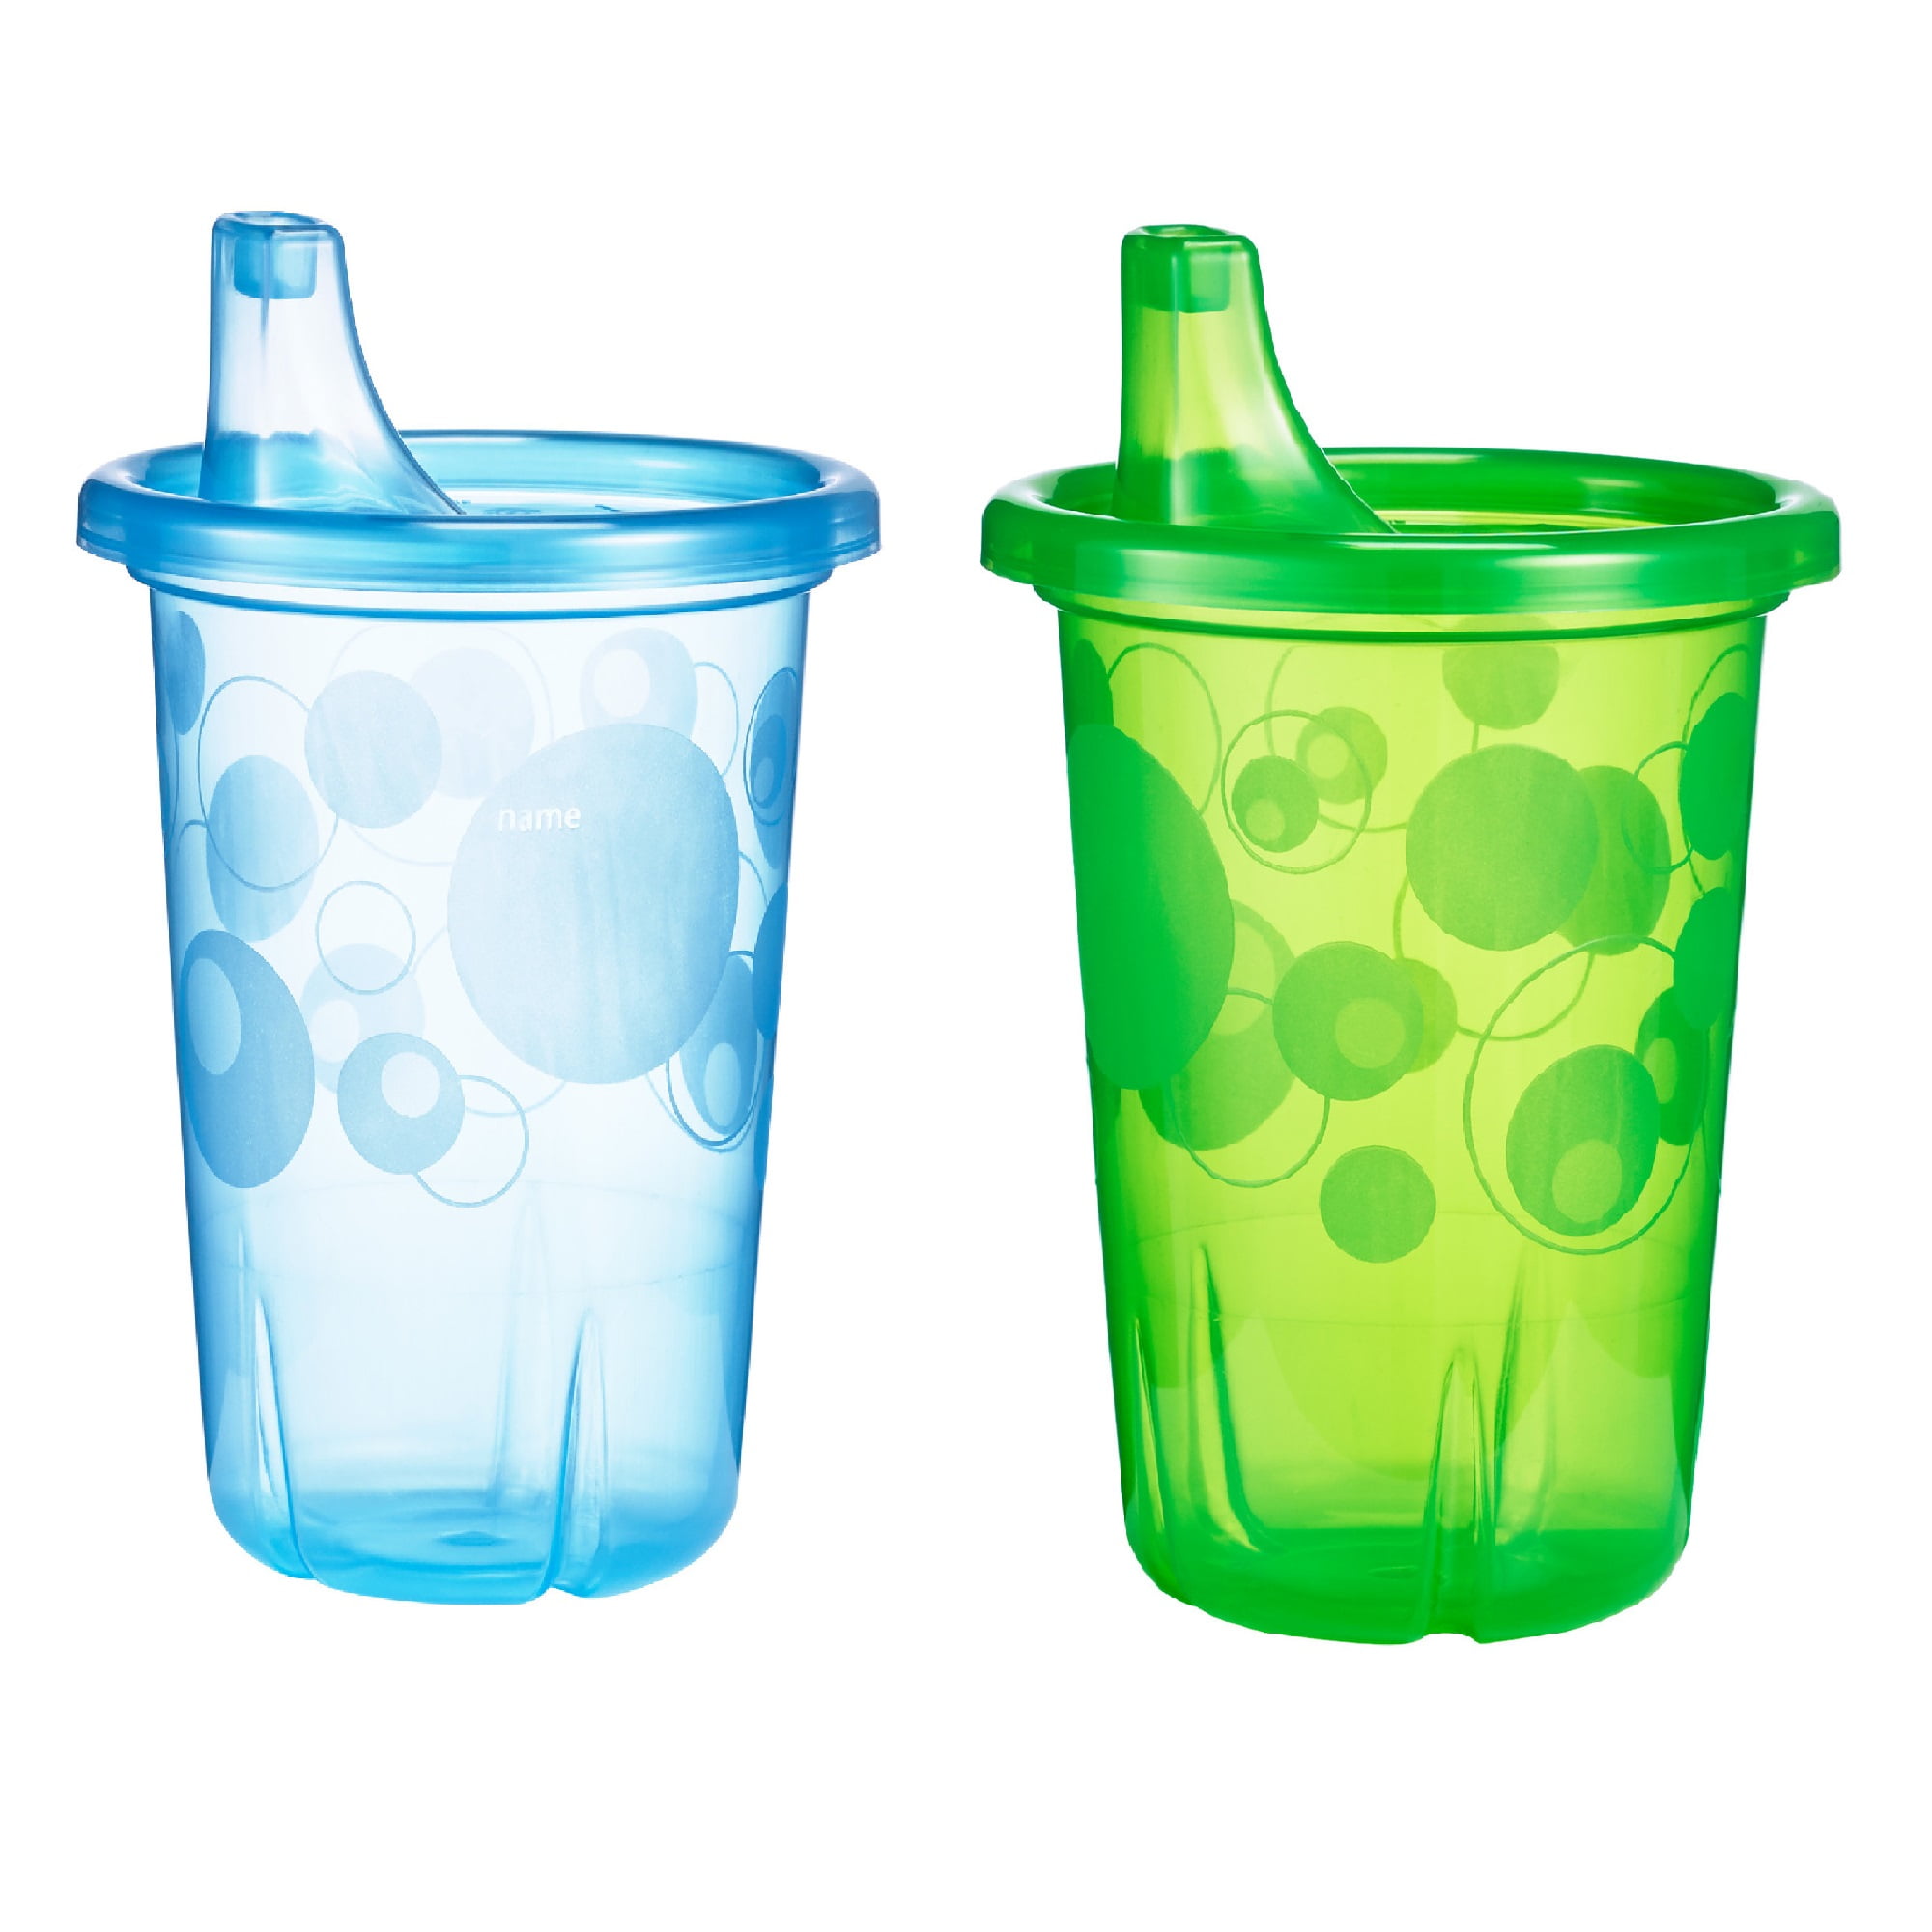 Bottles and Sippy Cups –